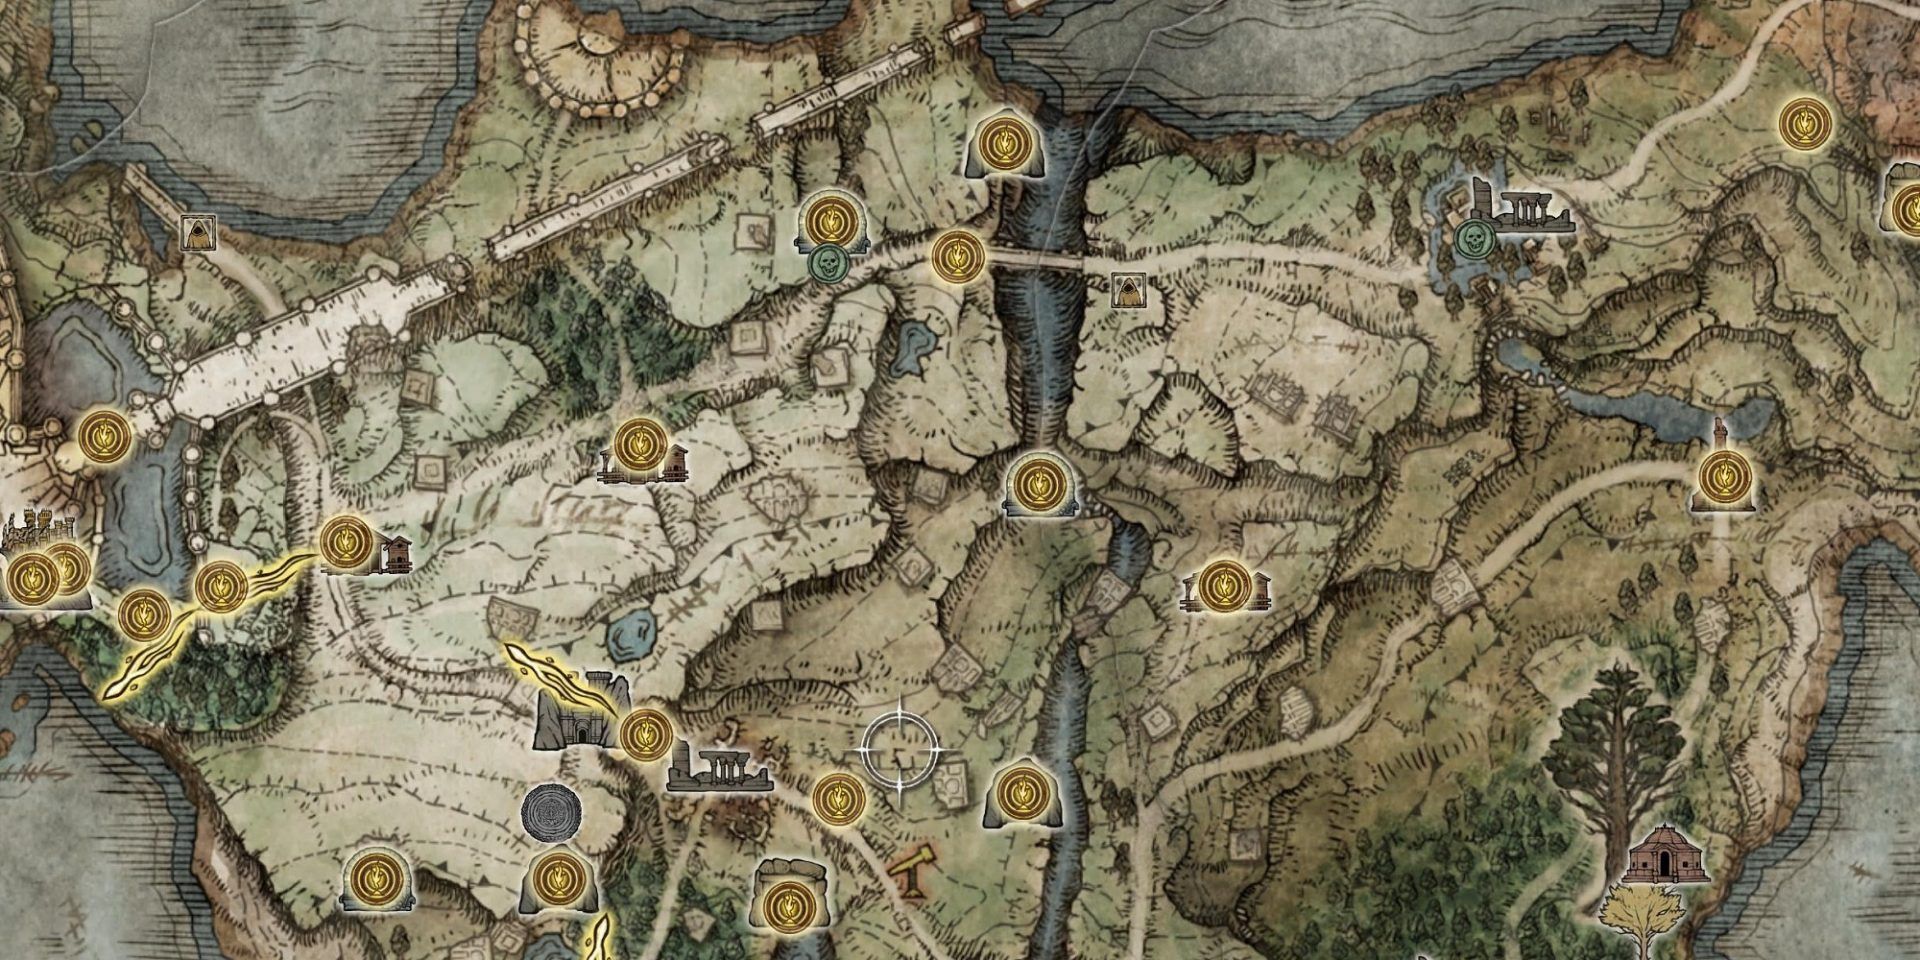 Elden Ring Limgrave Map showing Deathroot locations